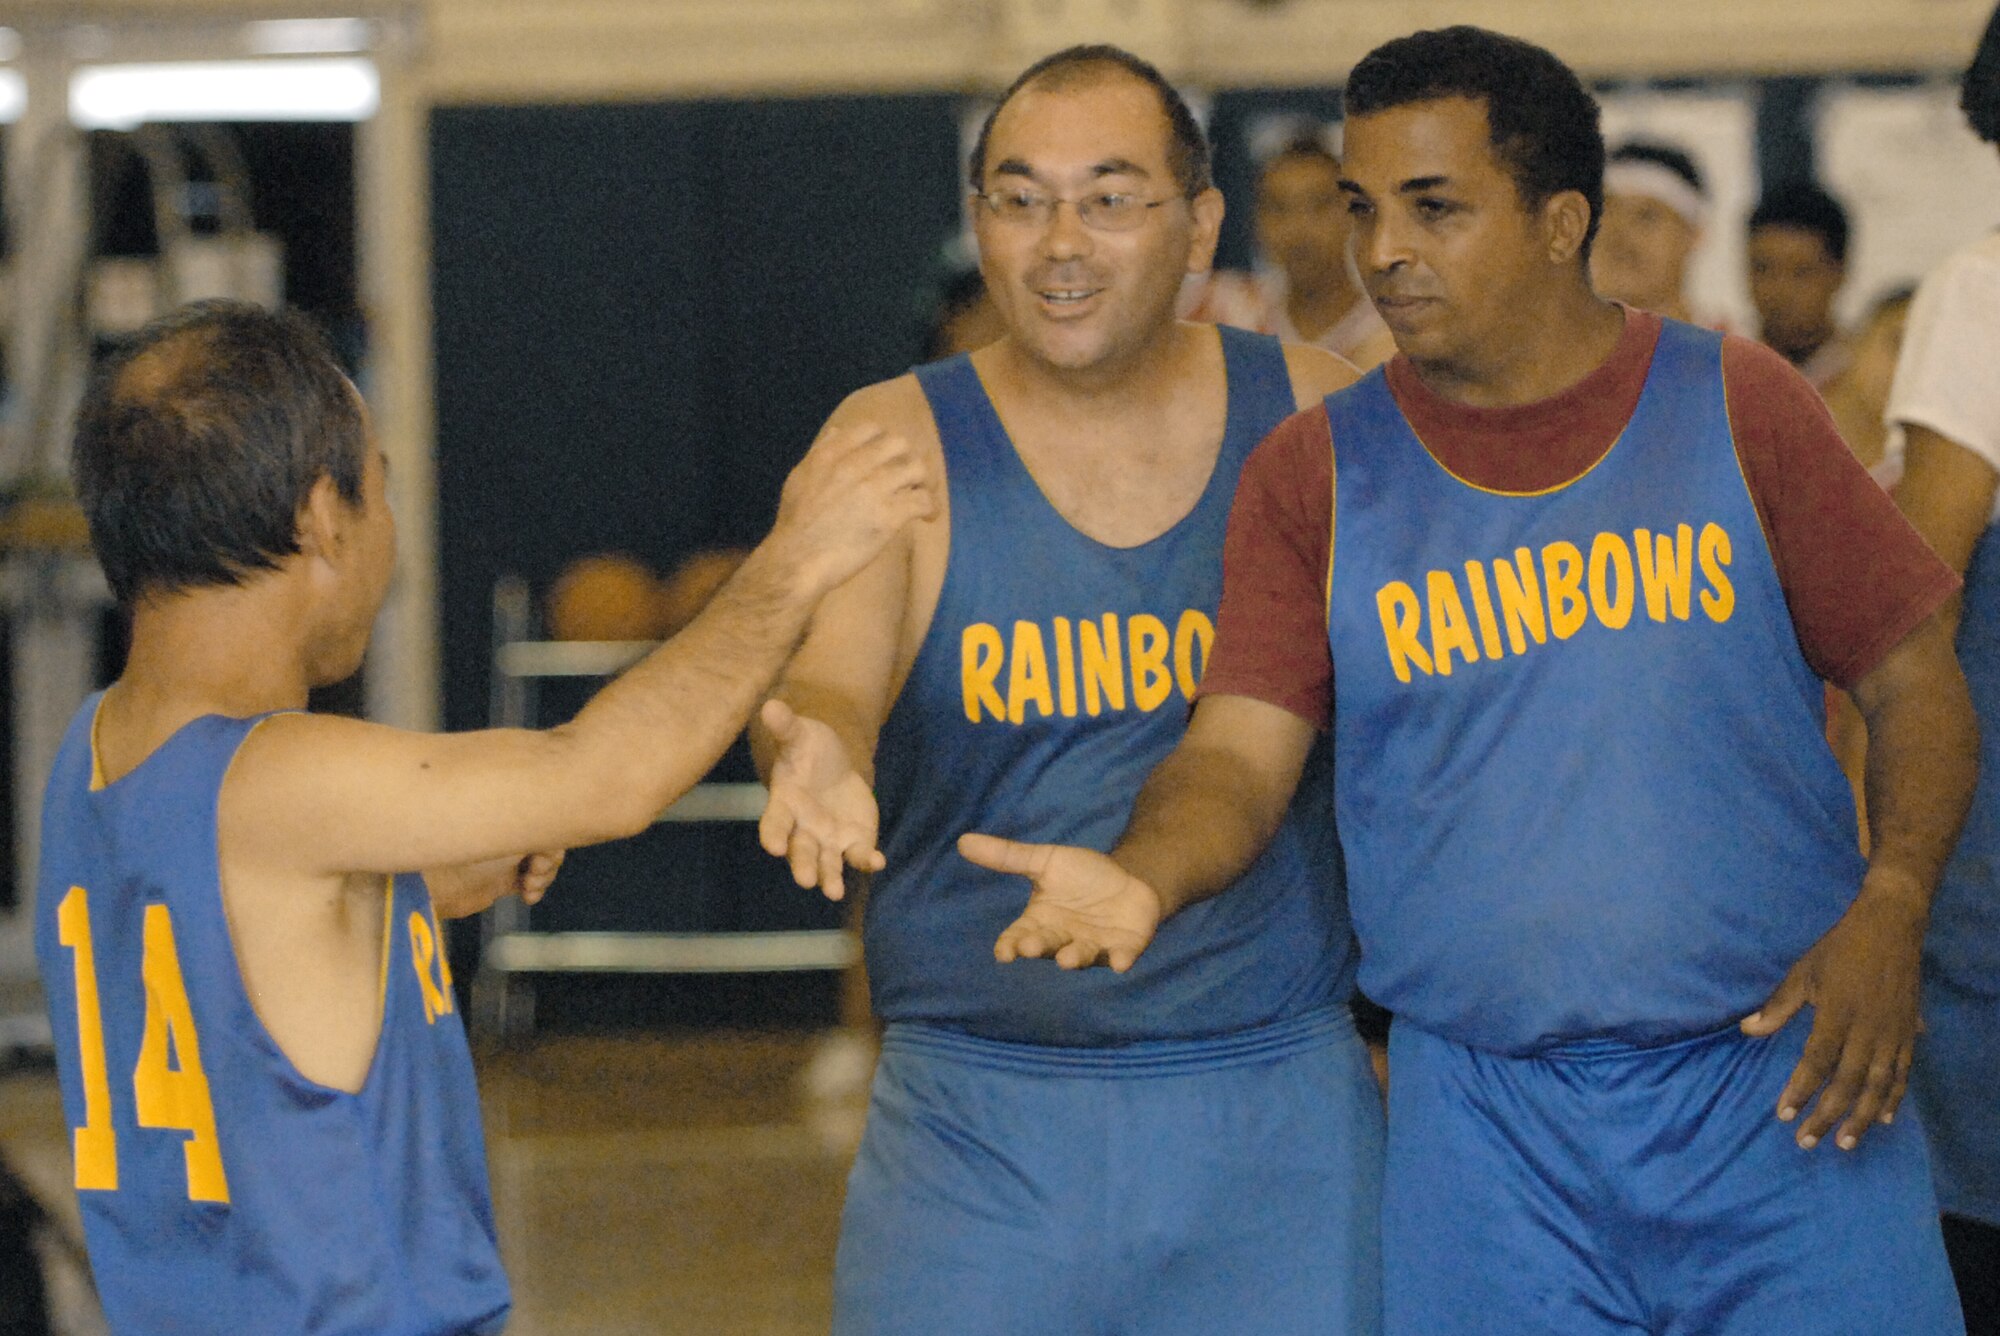 Special Olympics Rainbows basketball team members share a moment of camaraderie during a game Dec. 4, 2010, at Joint Base Pearl Harbor-Hickam, Hawaii. (U.S. Air Force photo/Staff Sgt. Carolyn Viss) 